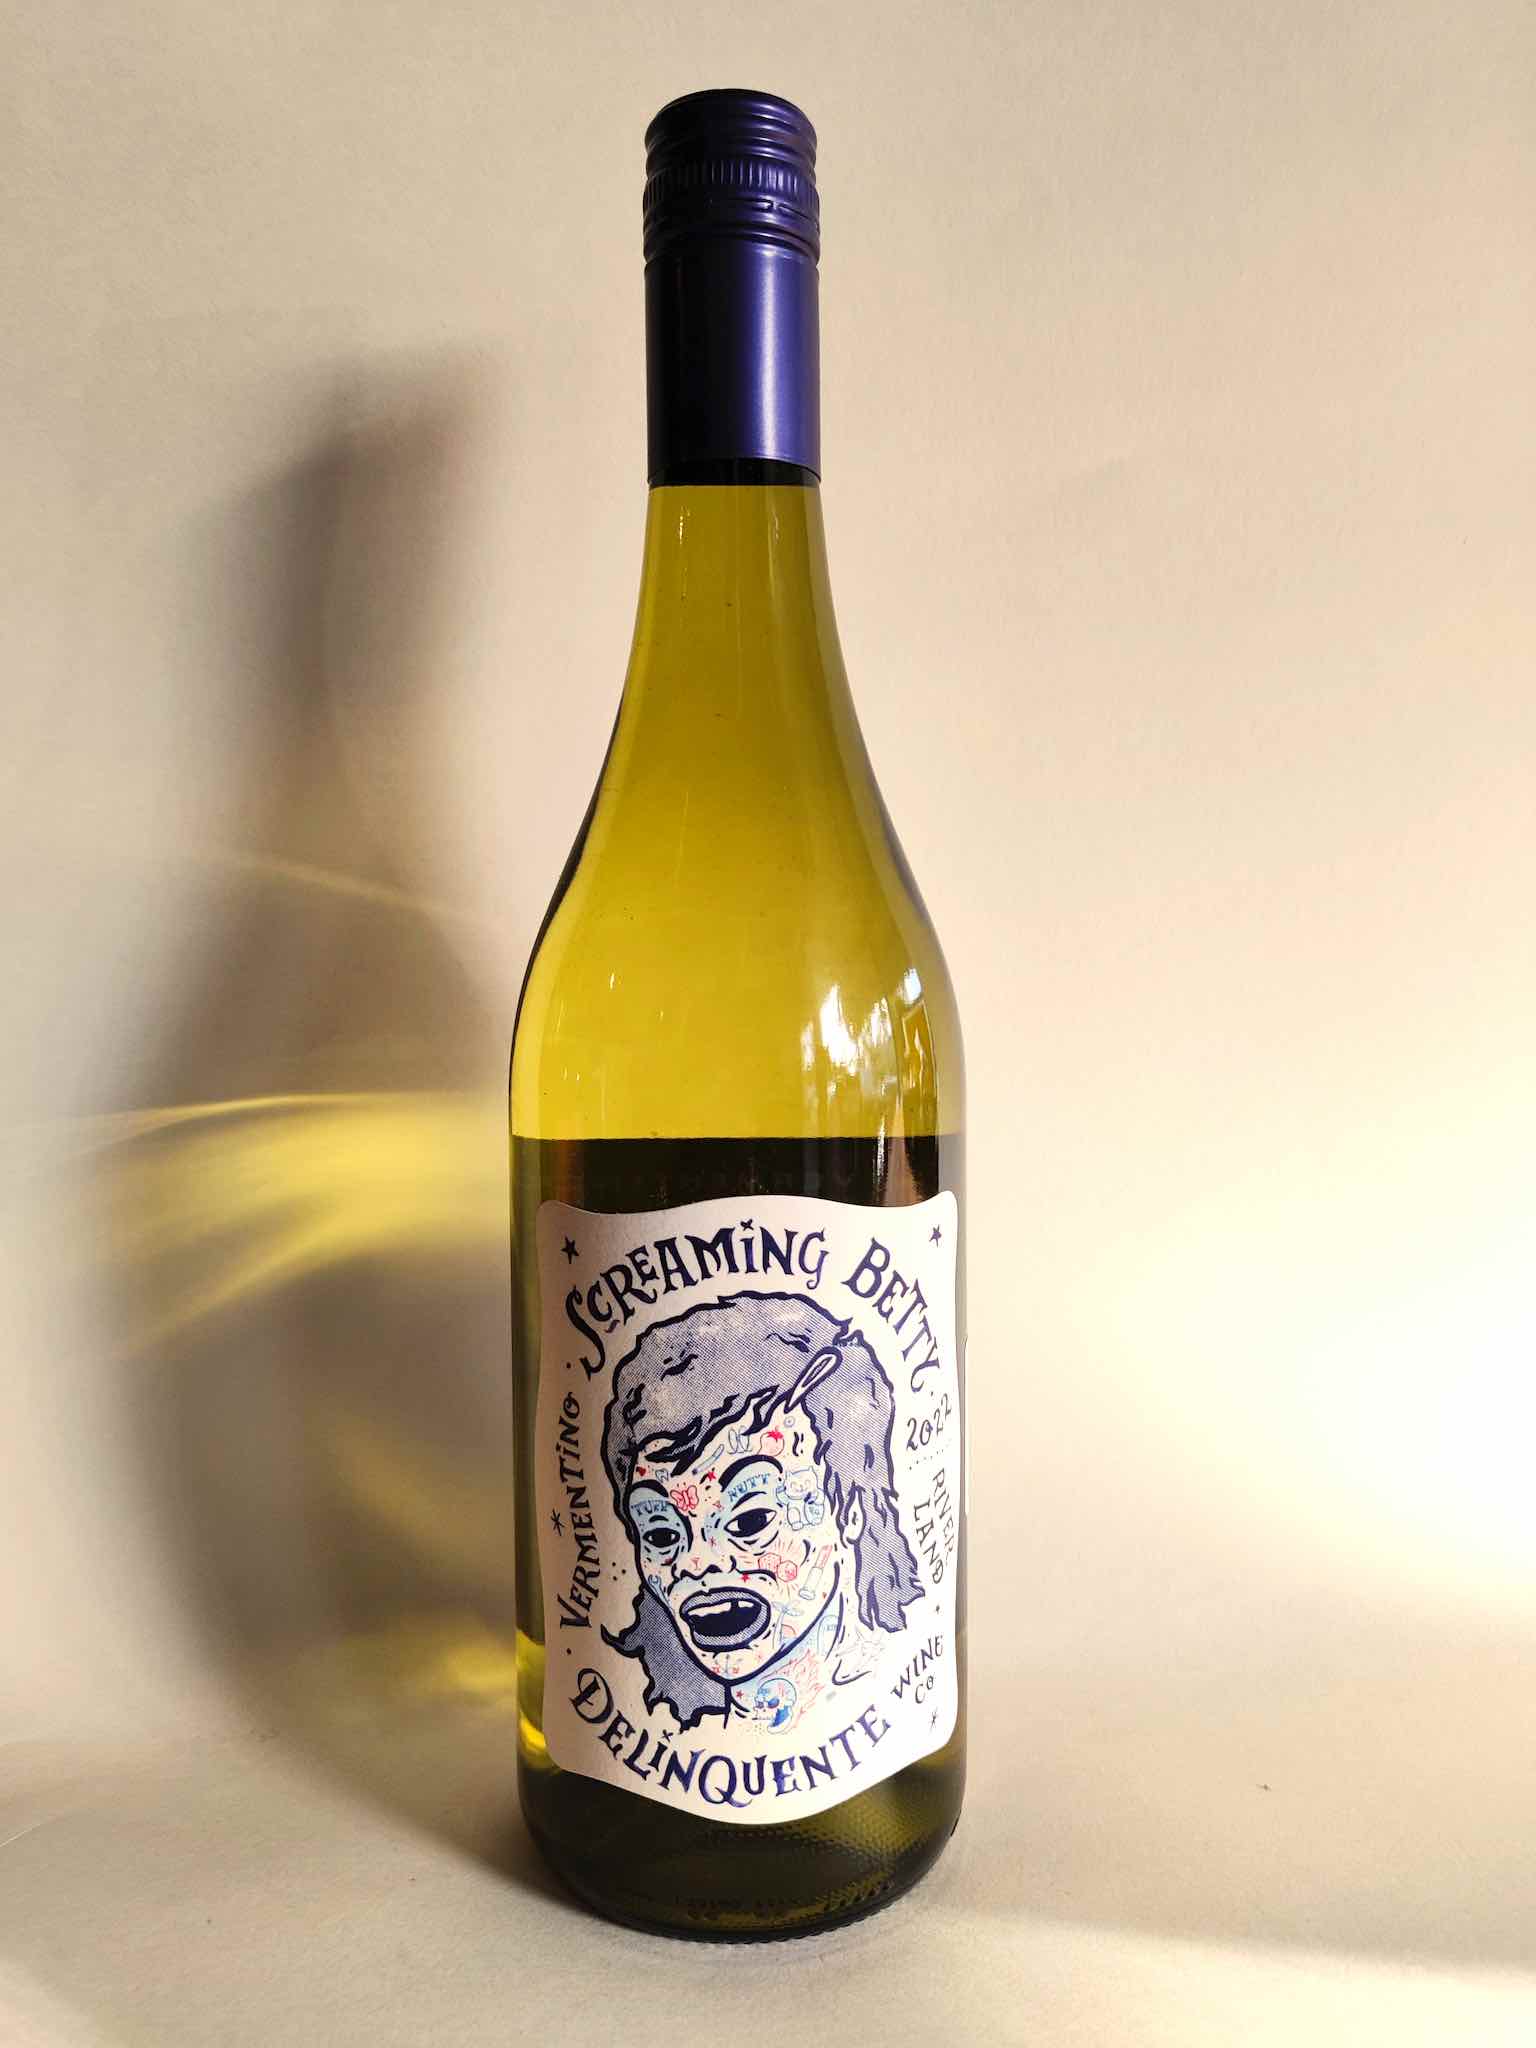 A bottle of Delinquente Screaming Betty Vermentino from the Riverland, South Australia. 